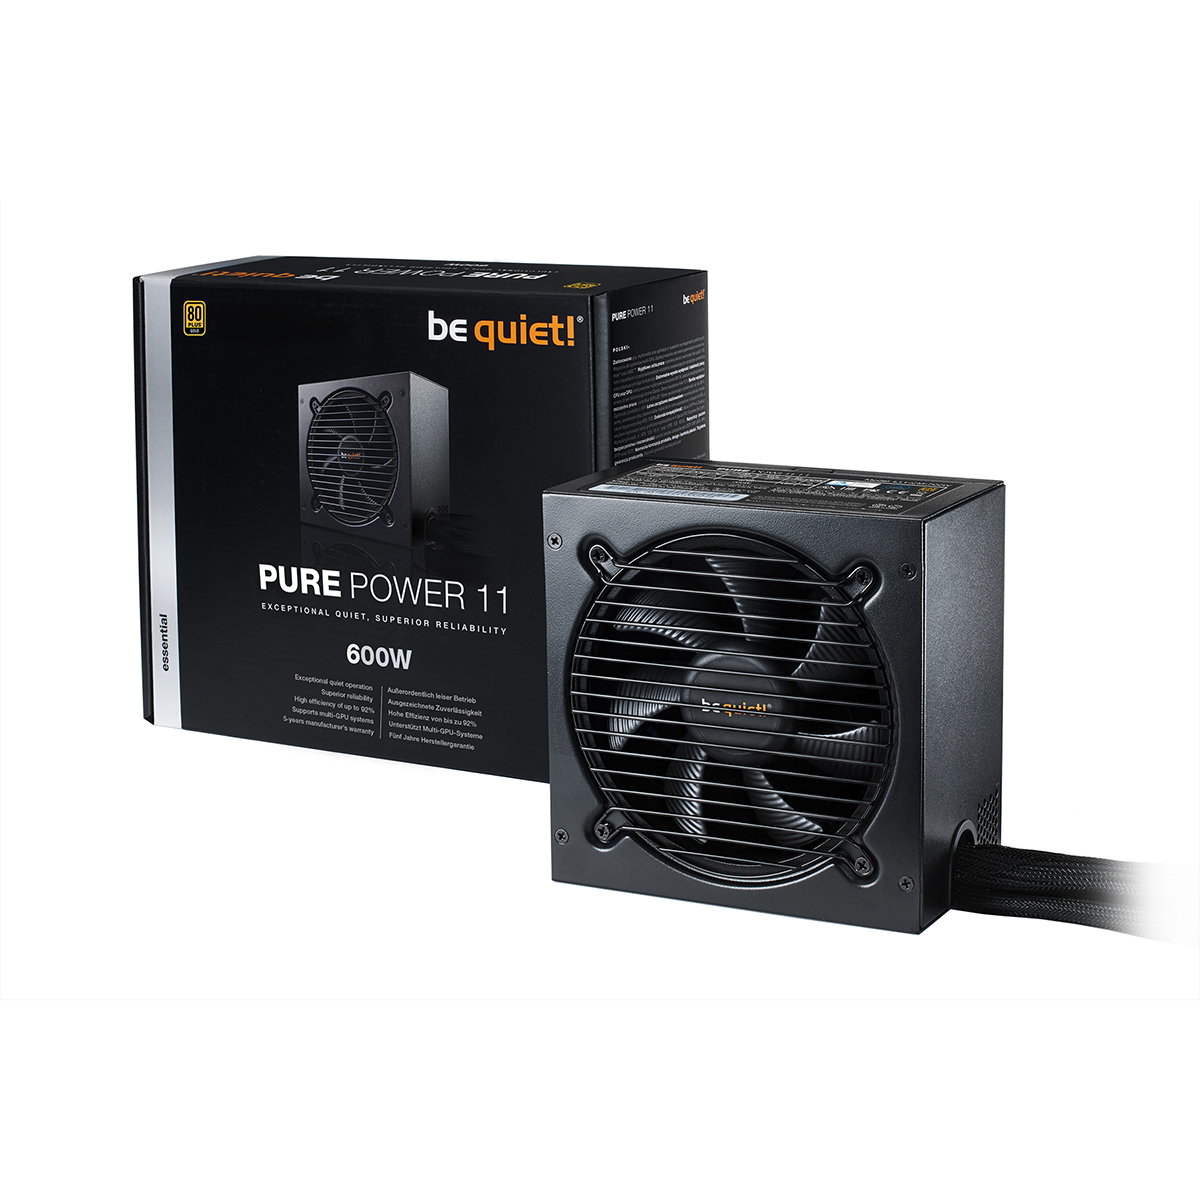 be quiet! - be quiet Pure Power 11 600W 80 Plus Gold Power Supply